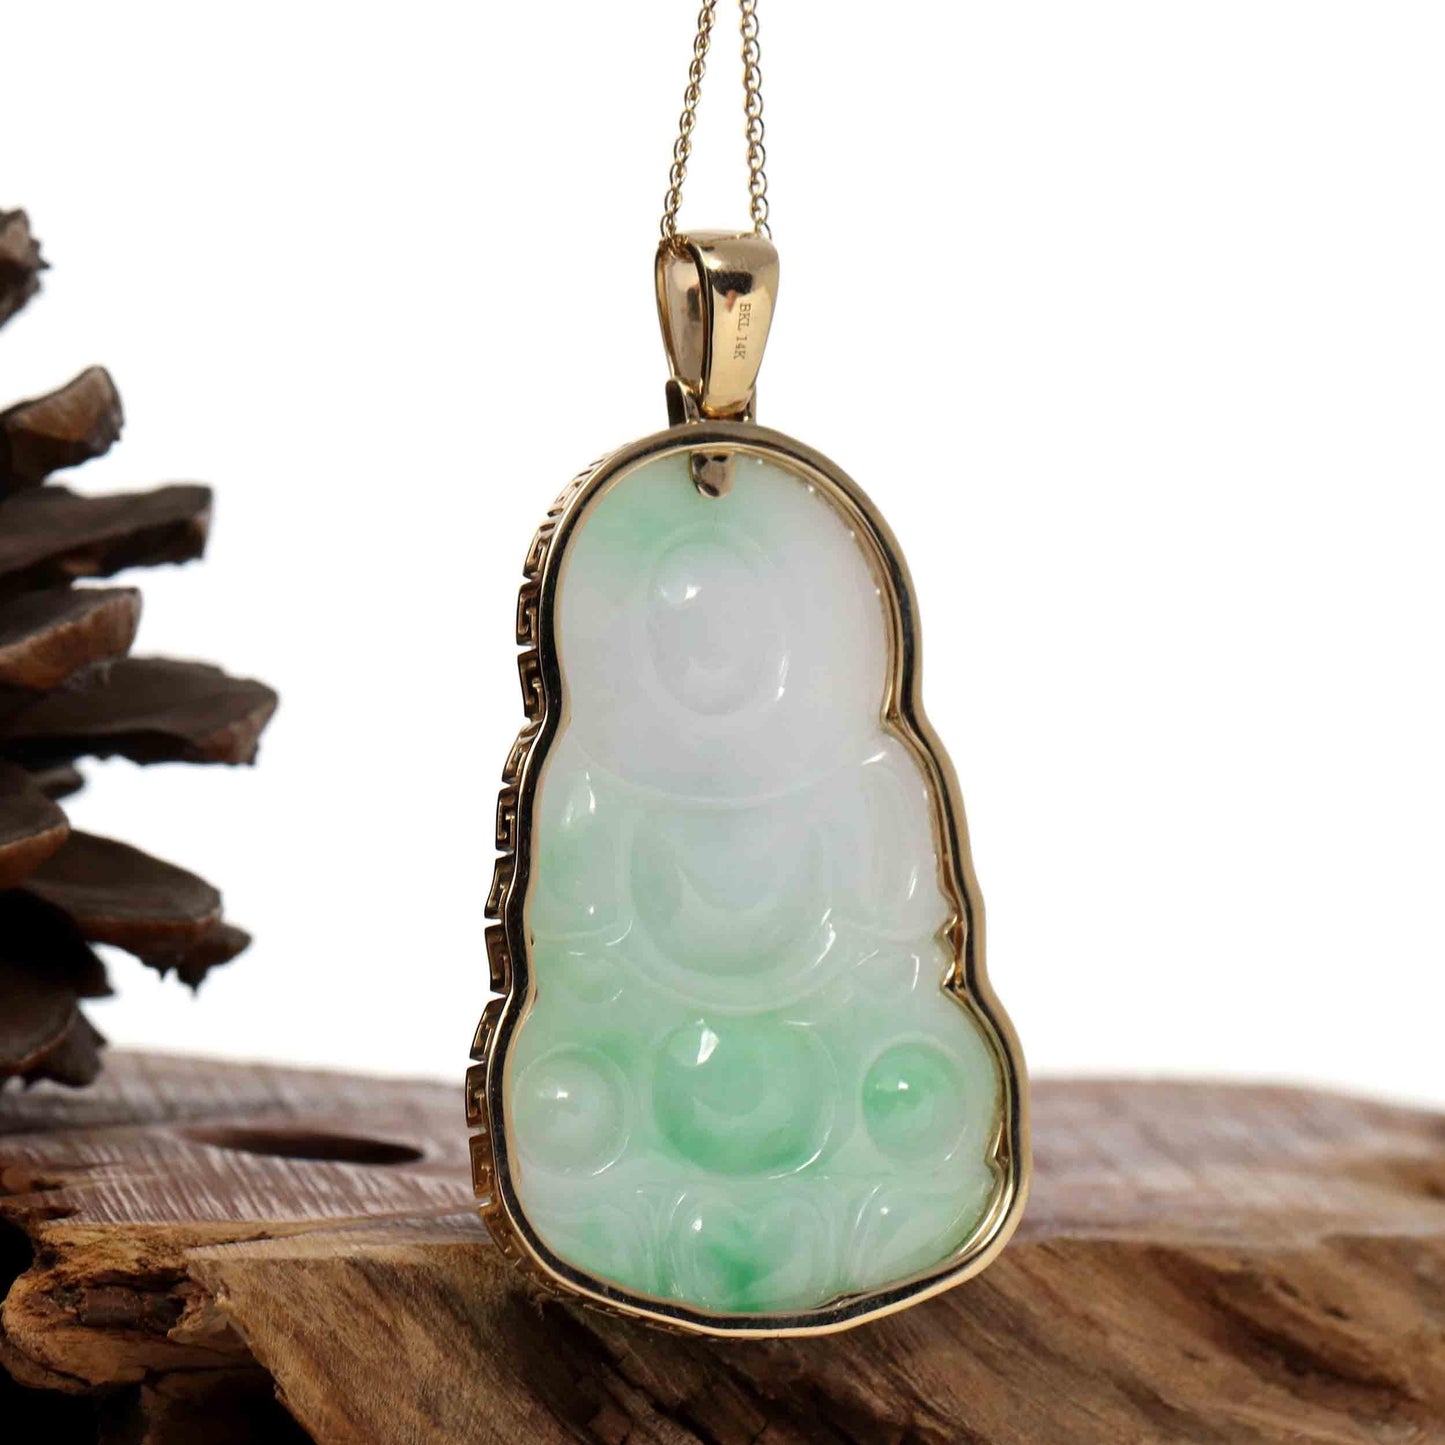 RealJade Co.® Jade Guanyin Pendant Necklace Copy of Copy of "Goddess of Compassion" 14k Yellow Gold Genuine Burmese Jadeite Jade Guanyin Necklace With Good Luck Design